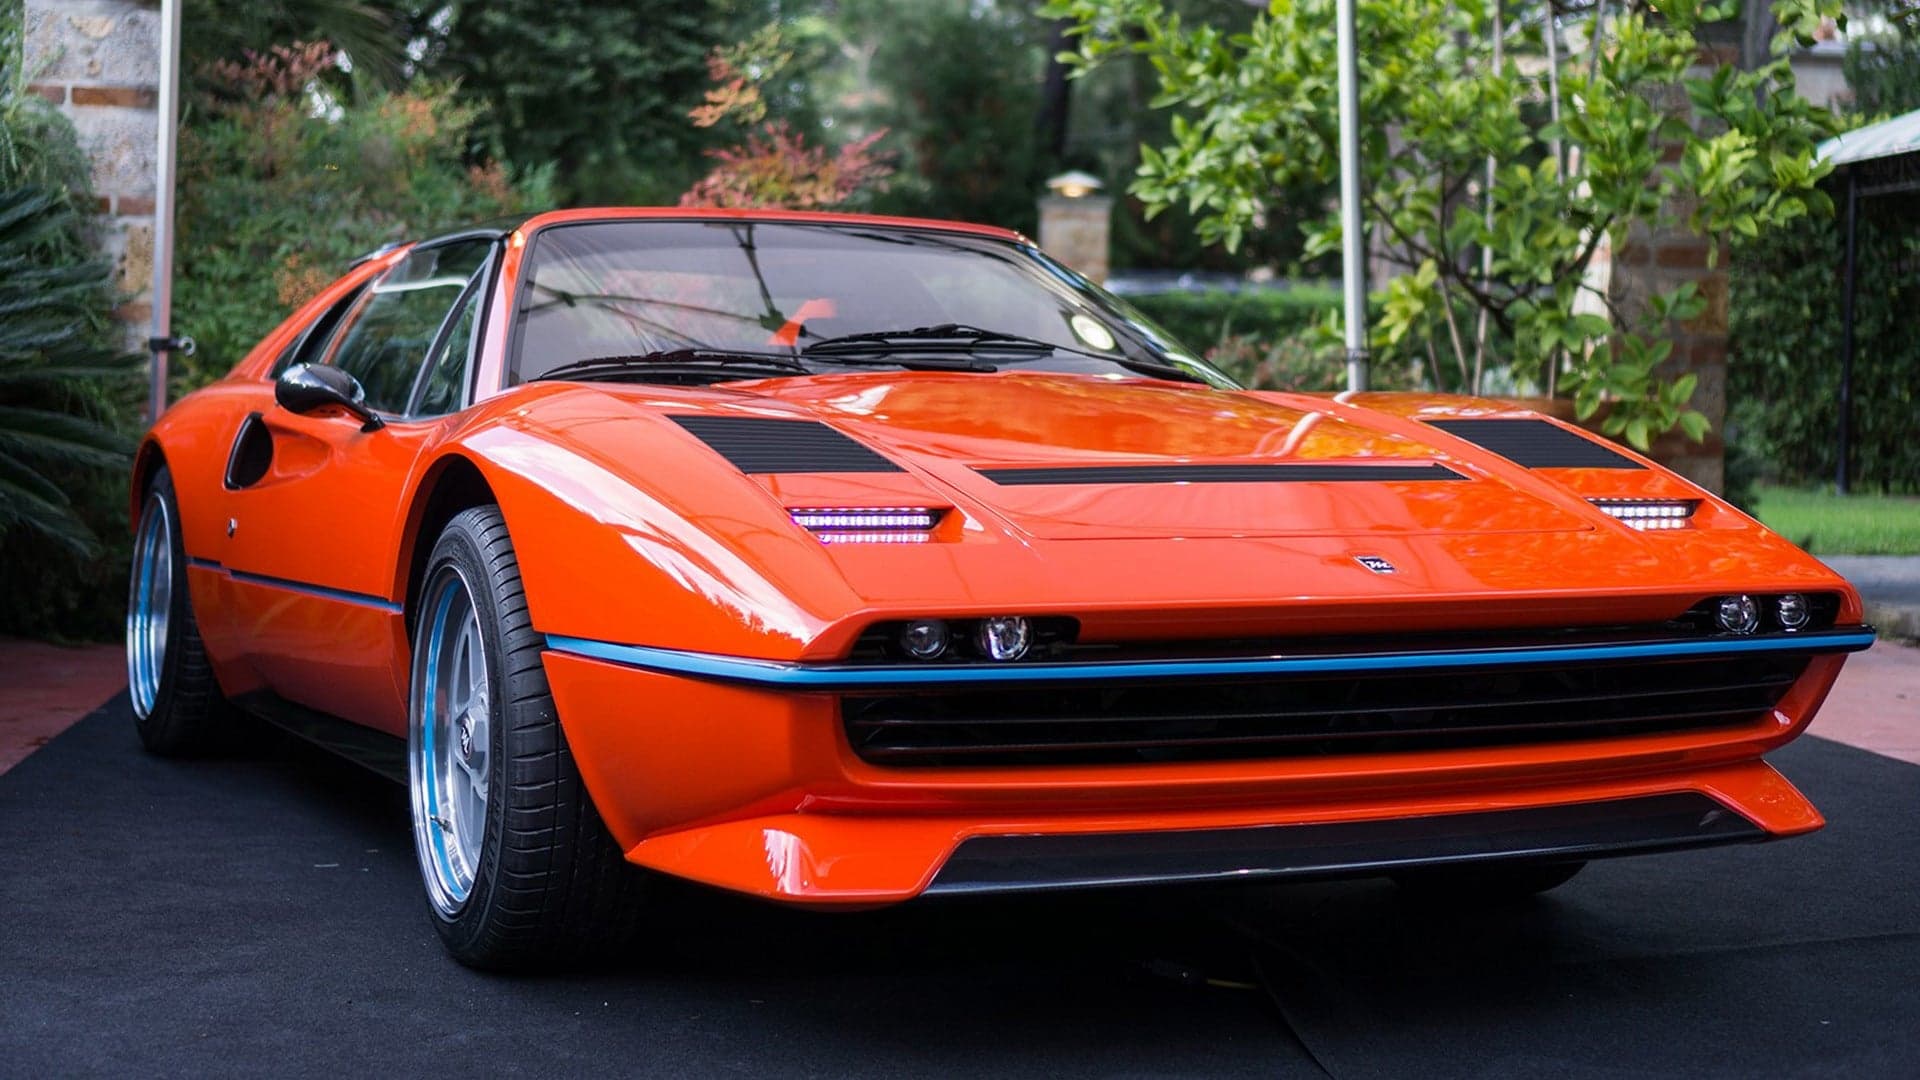 The Ferrari 308M by Maggiore Is How Maranello Would Make One Today